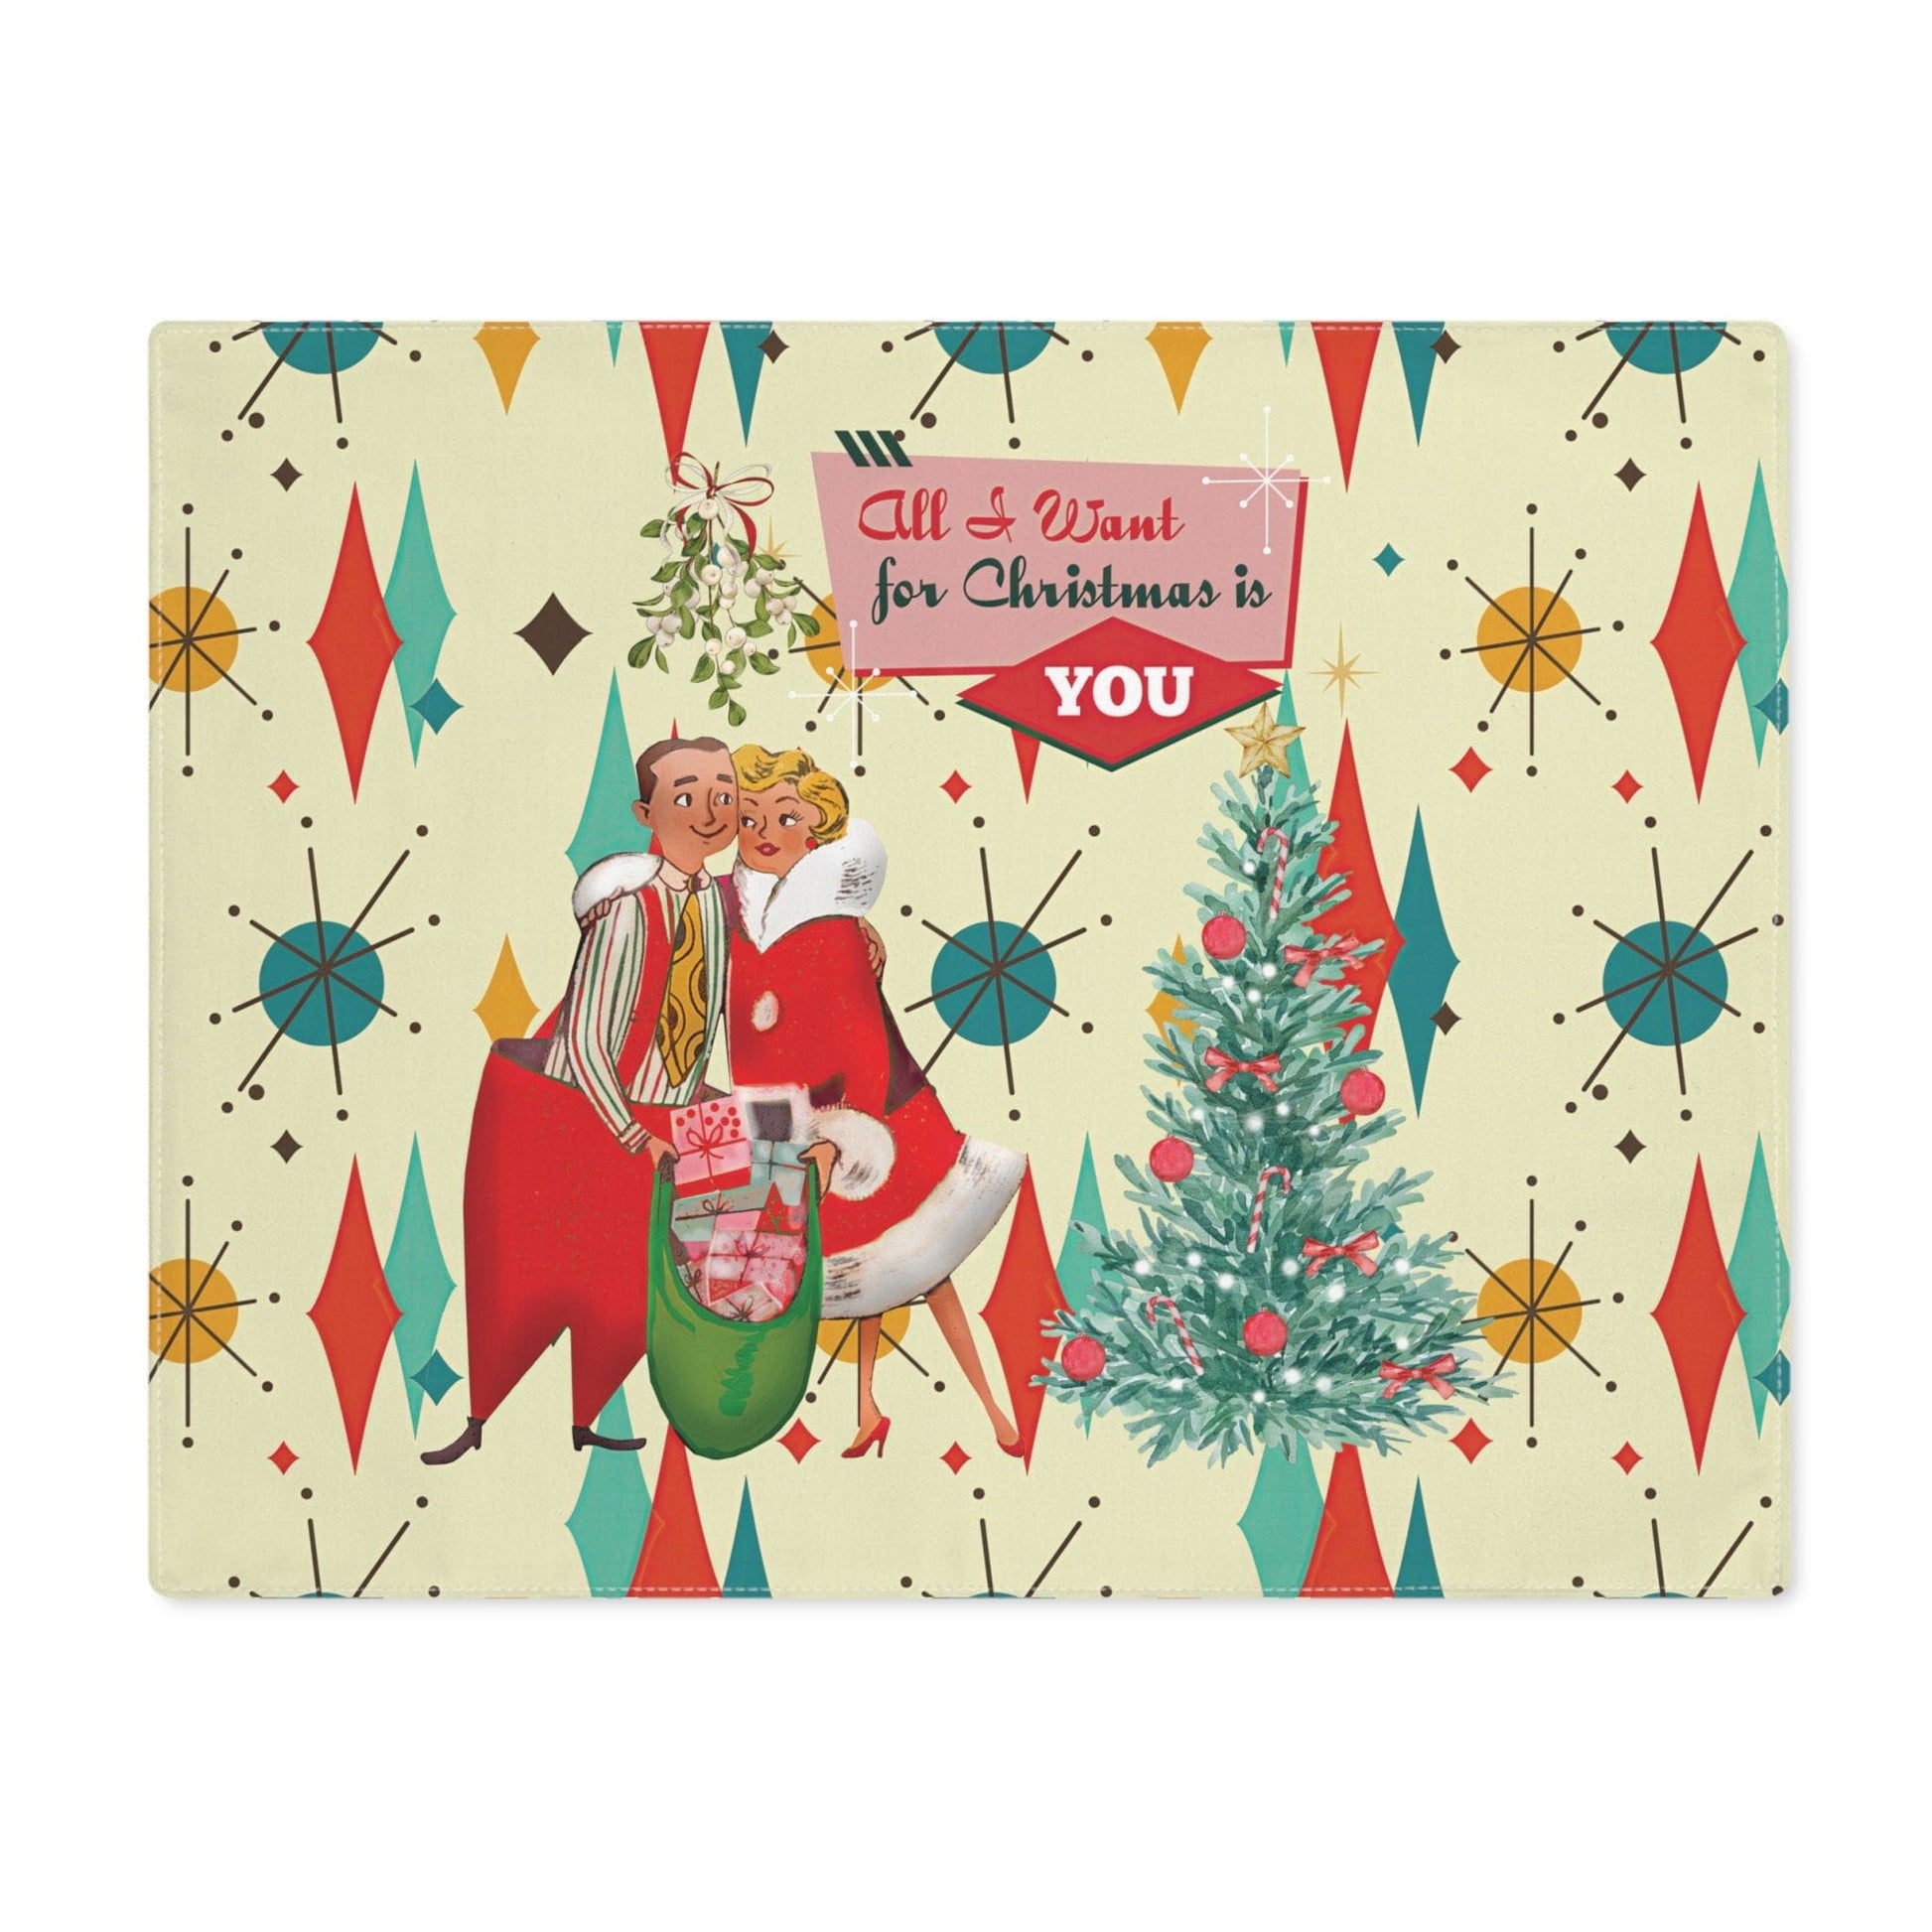 Kate McEnroe New York Retro Vintage 50s Franciscan Diamond Starburst Kitsch Christmas Card Art Placemat, Mid Century Modern Holiday Table Linen Placemats DPM-VIN-WOM-3